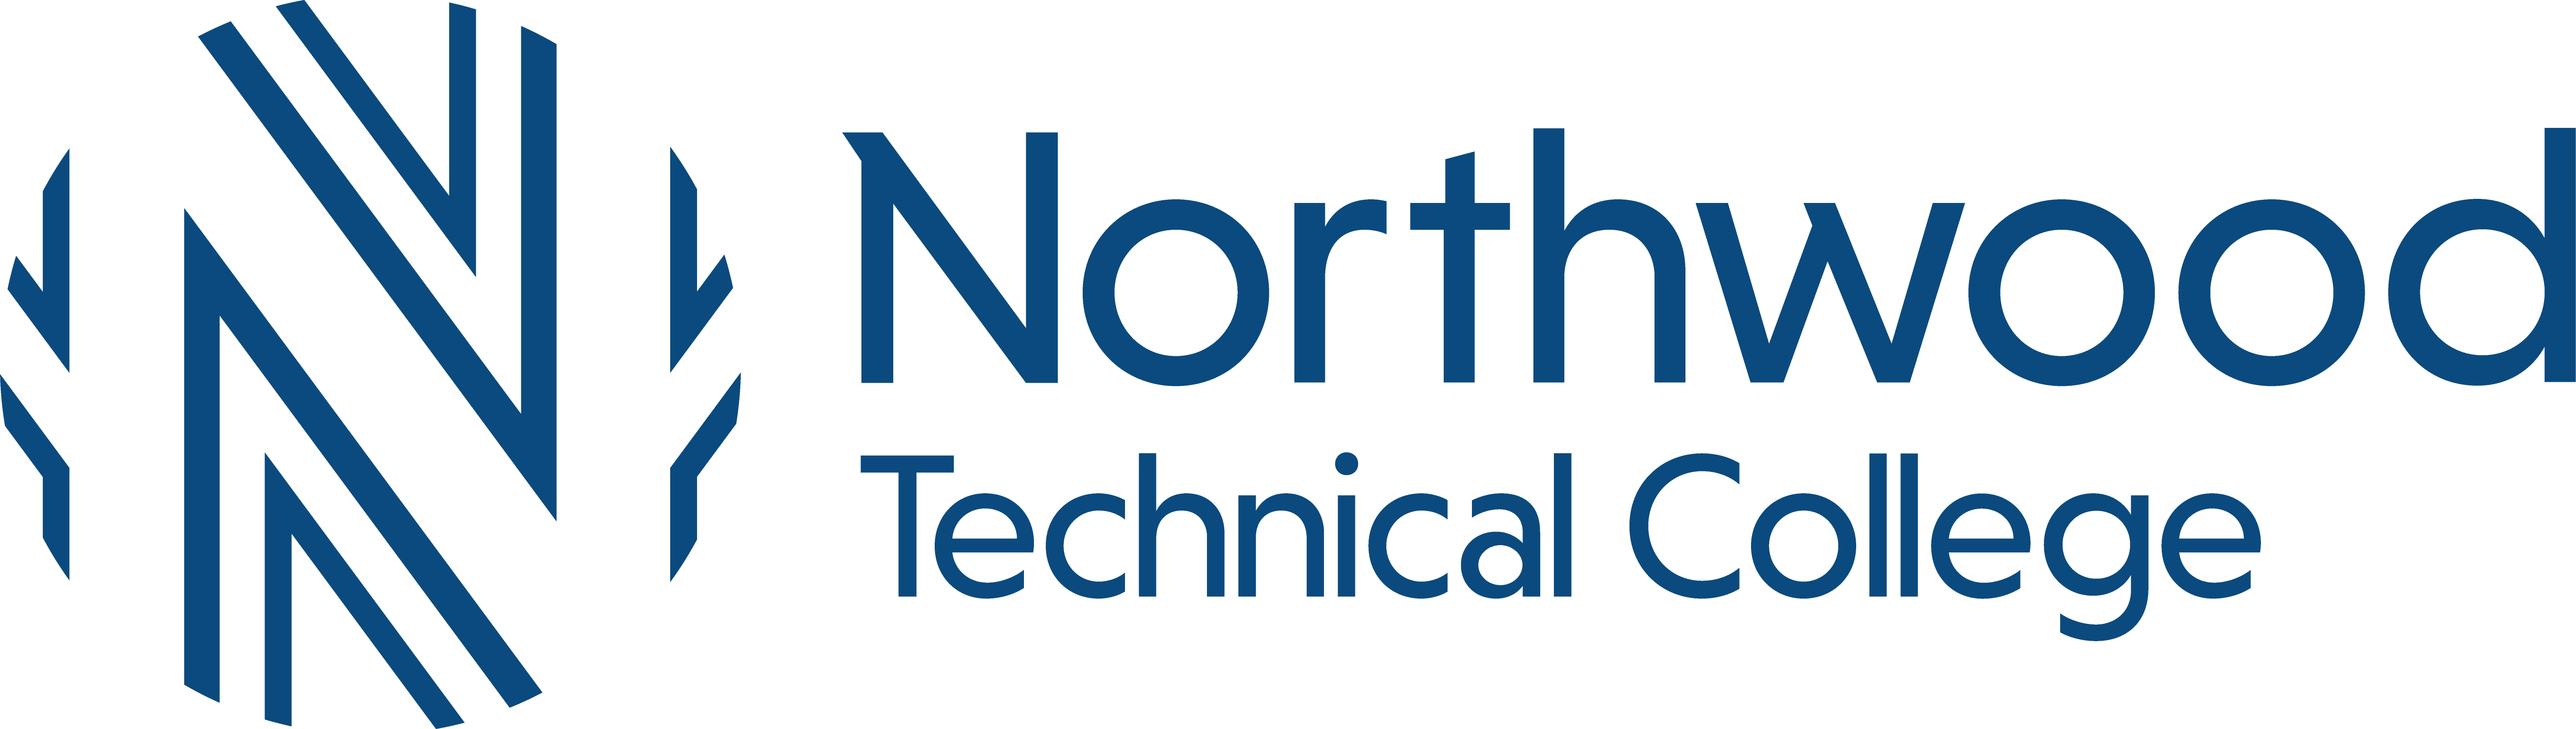 Northwoods Technical College